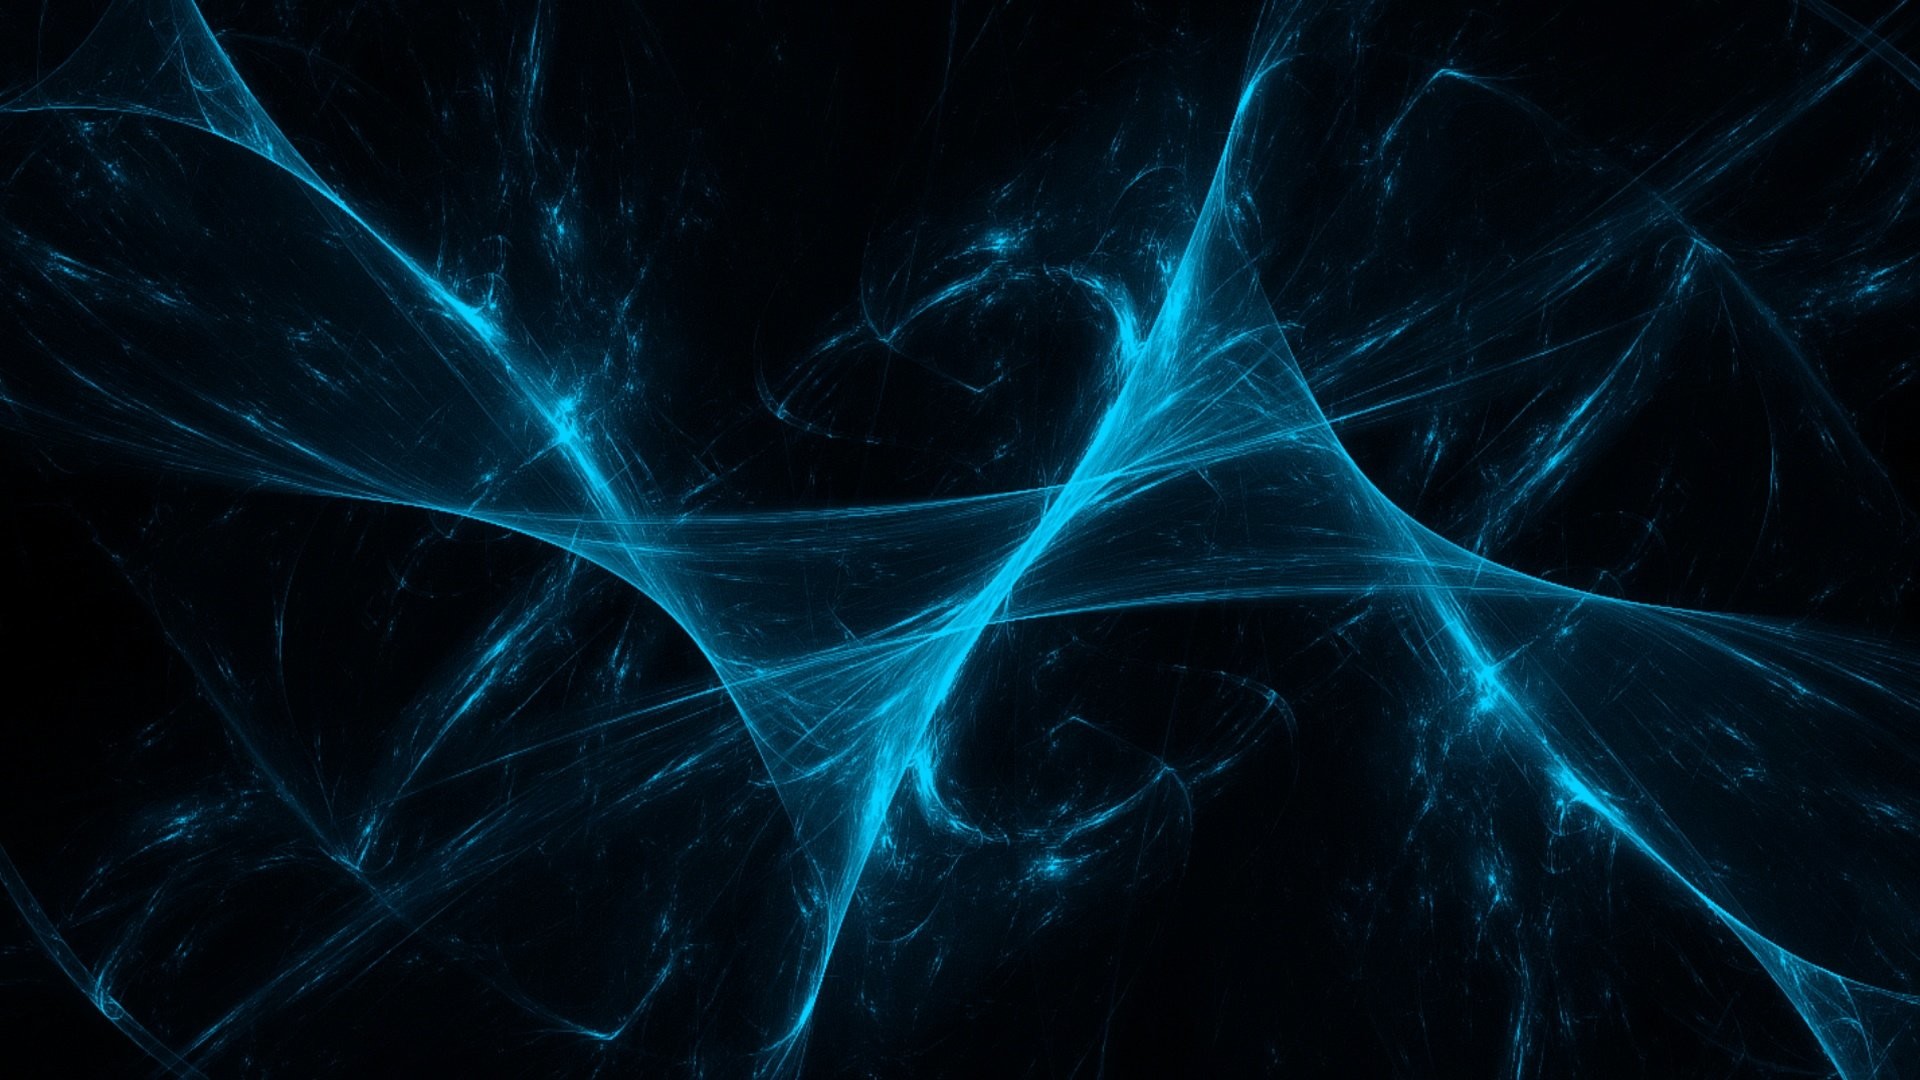 1920x1080 wallpapers-abstract-background-black-smoke-blue-backgrounds-image.